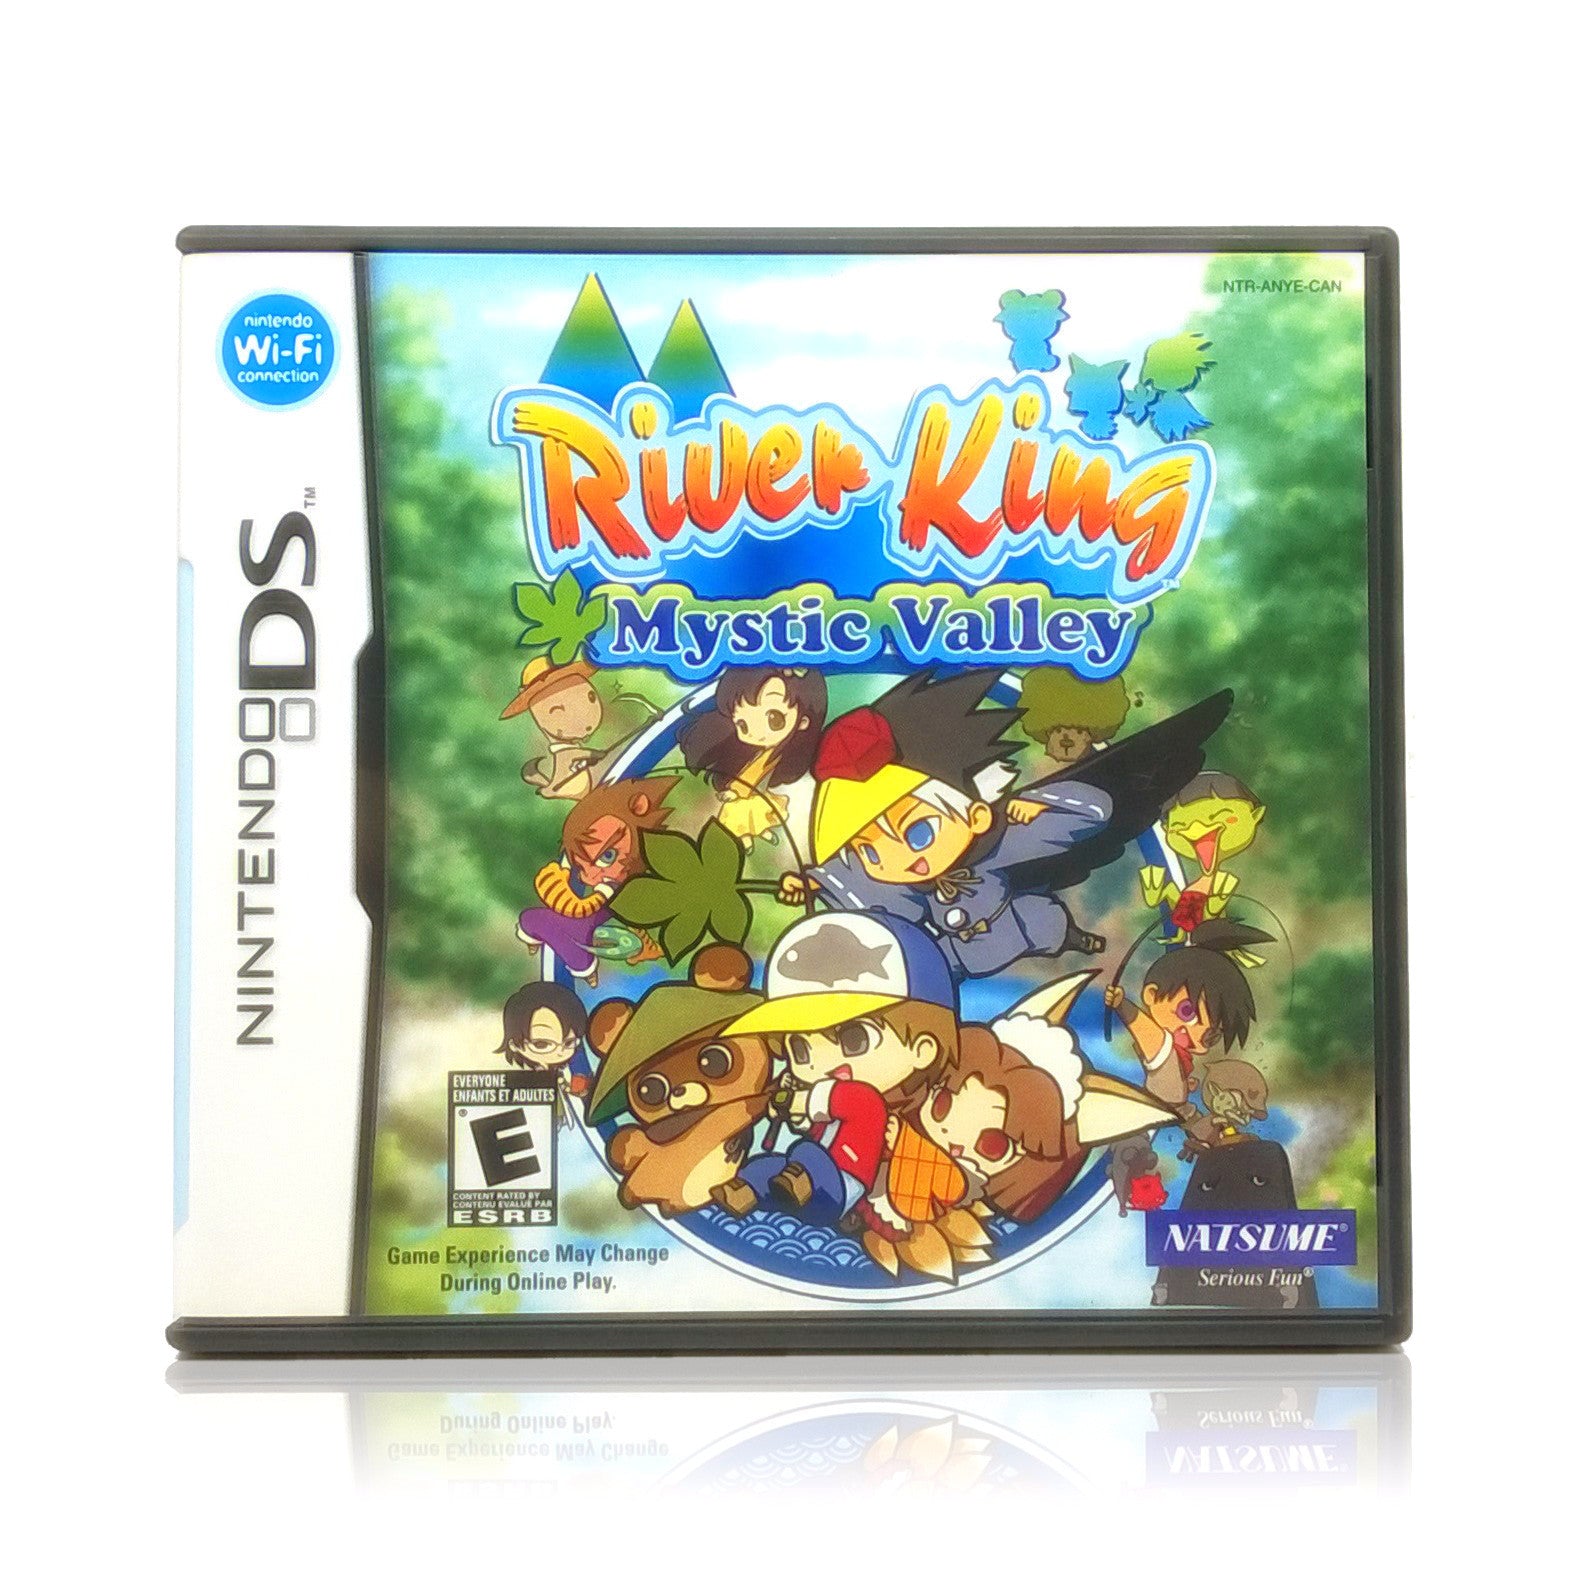 River King: Mystic Valley Nintendo DS Game - Case